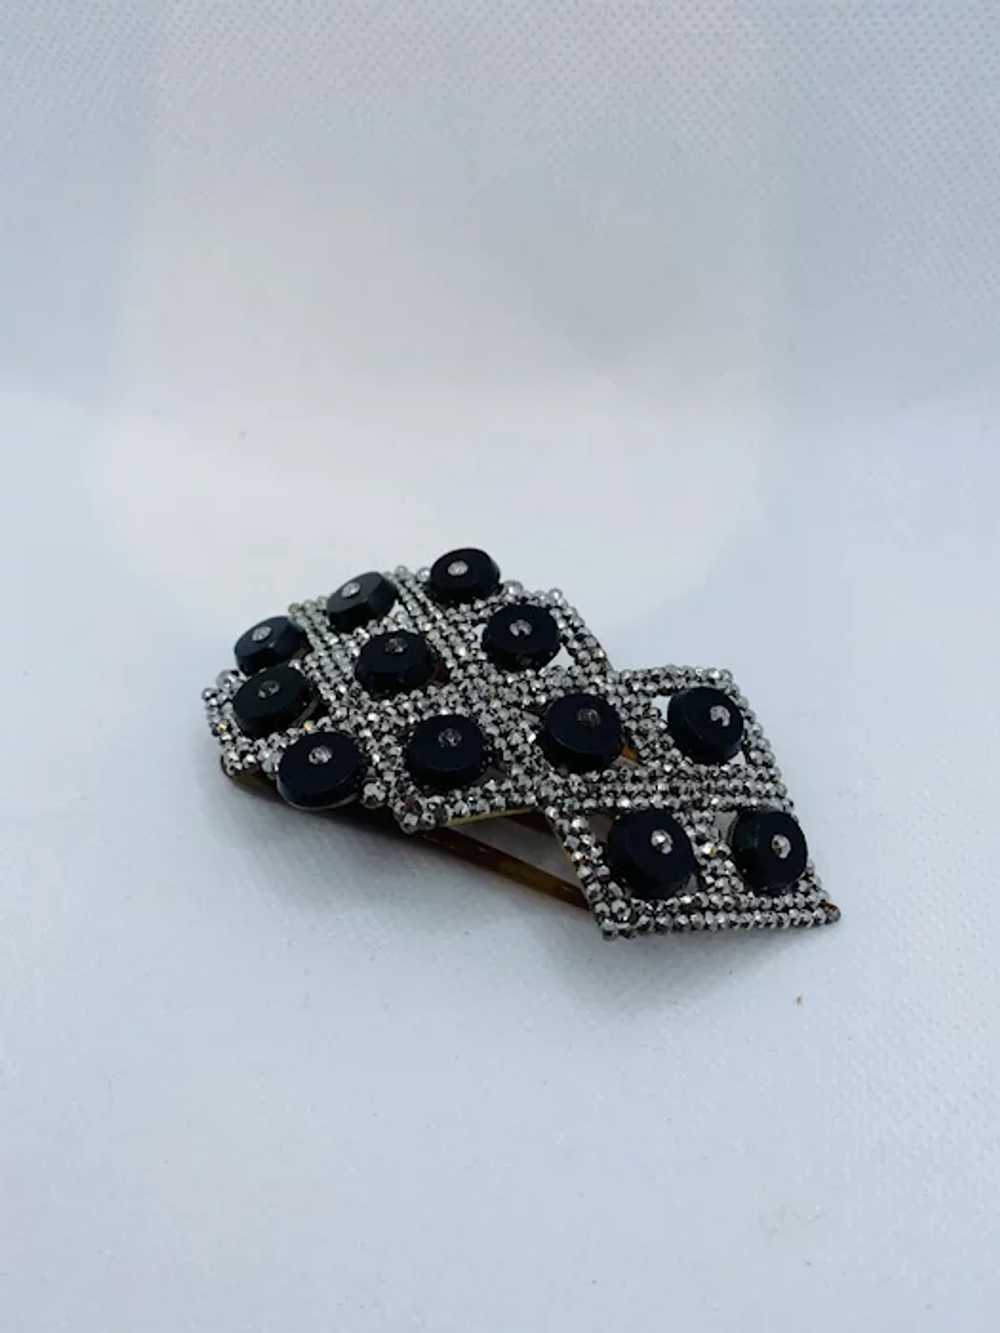 Antique Victorian Steel Cut Jewelry Onyx Hair Pin - image 2